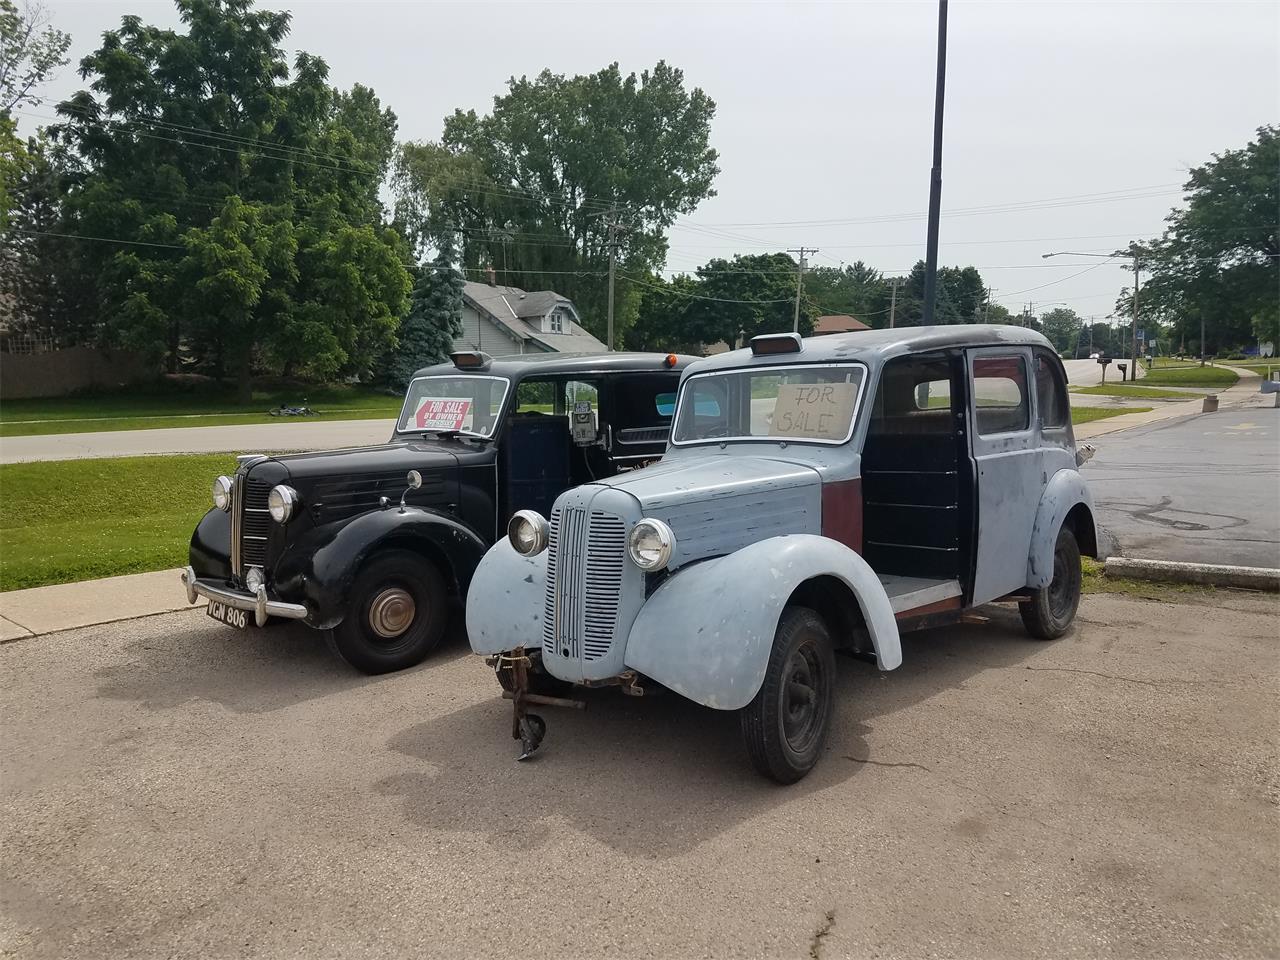 1958 Austin FX3 Taxi Cab for sale in Waukesha, WI – photo 2